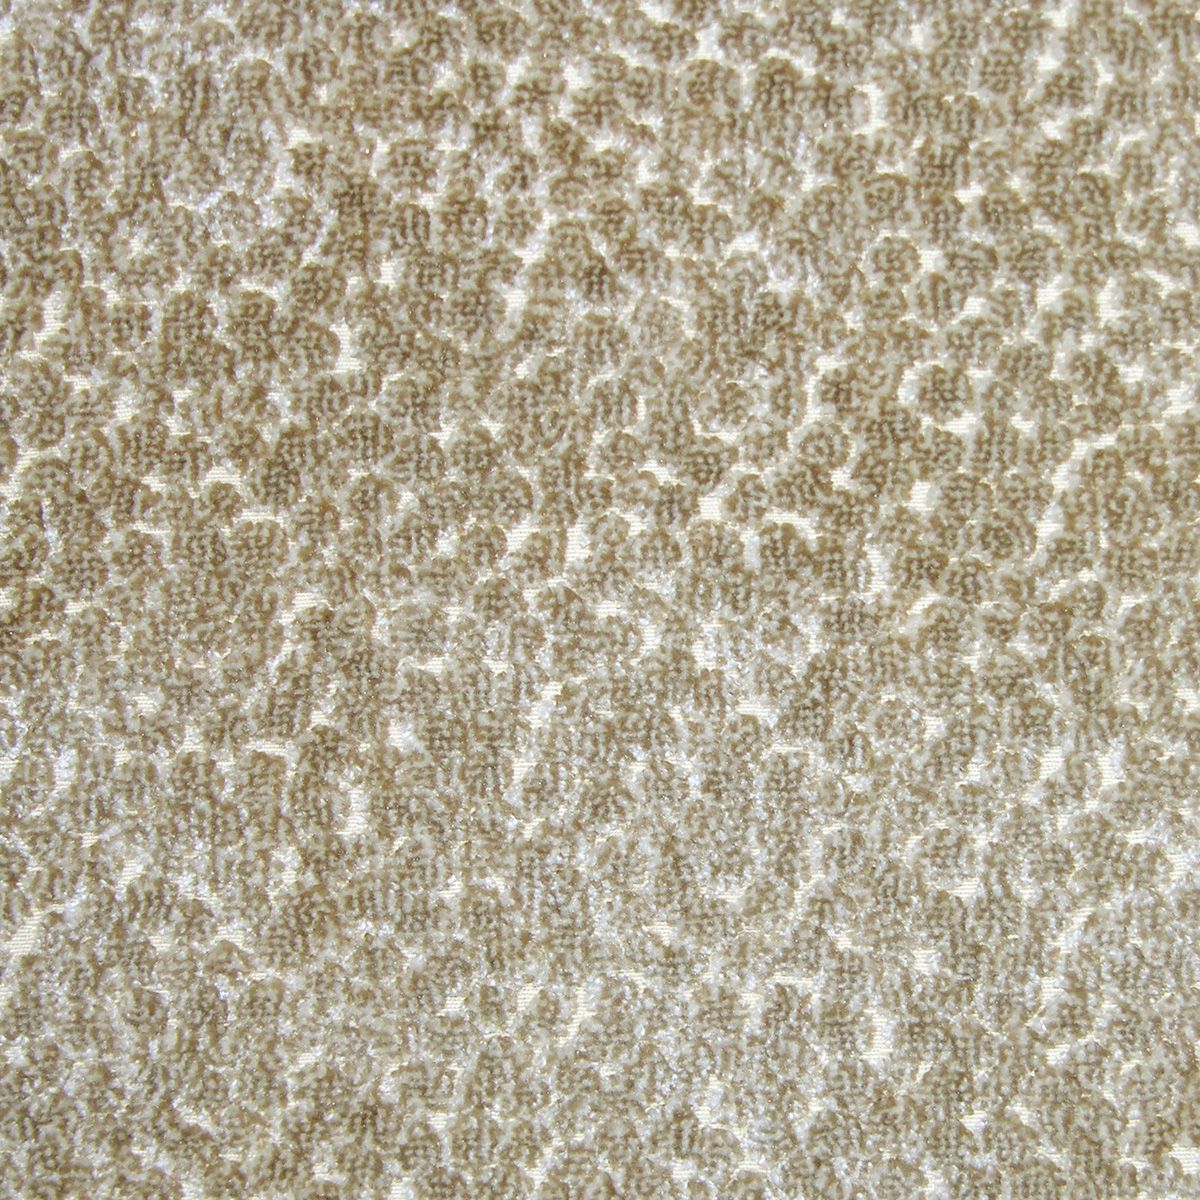 Sandemar fabric in taupe color - pattern number M5 00928531 - by Scalamandre in the Old World Weavers collection